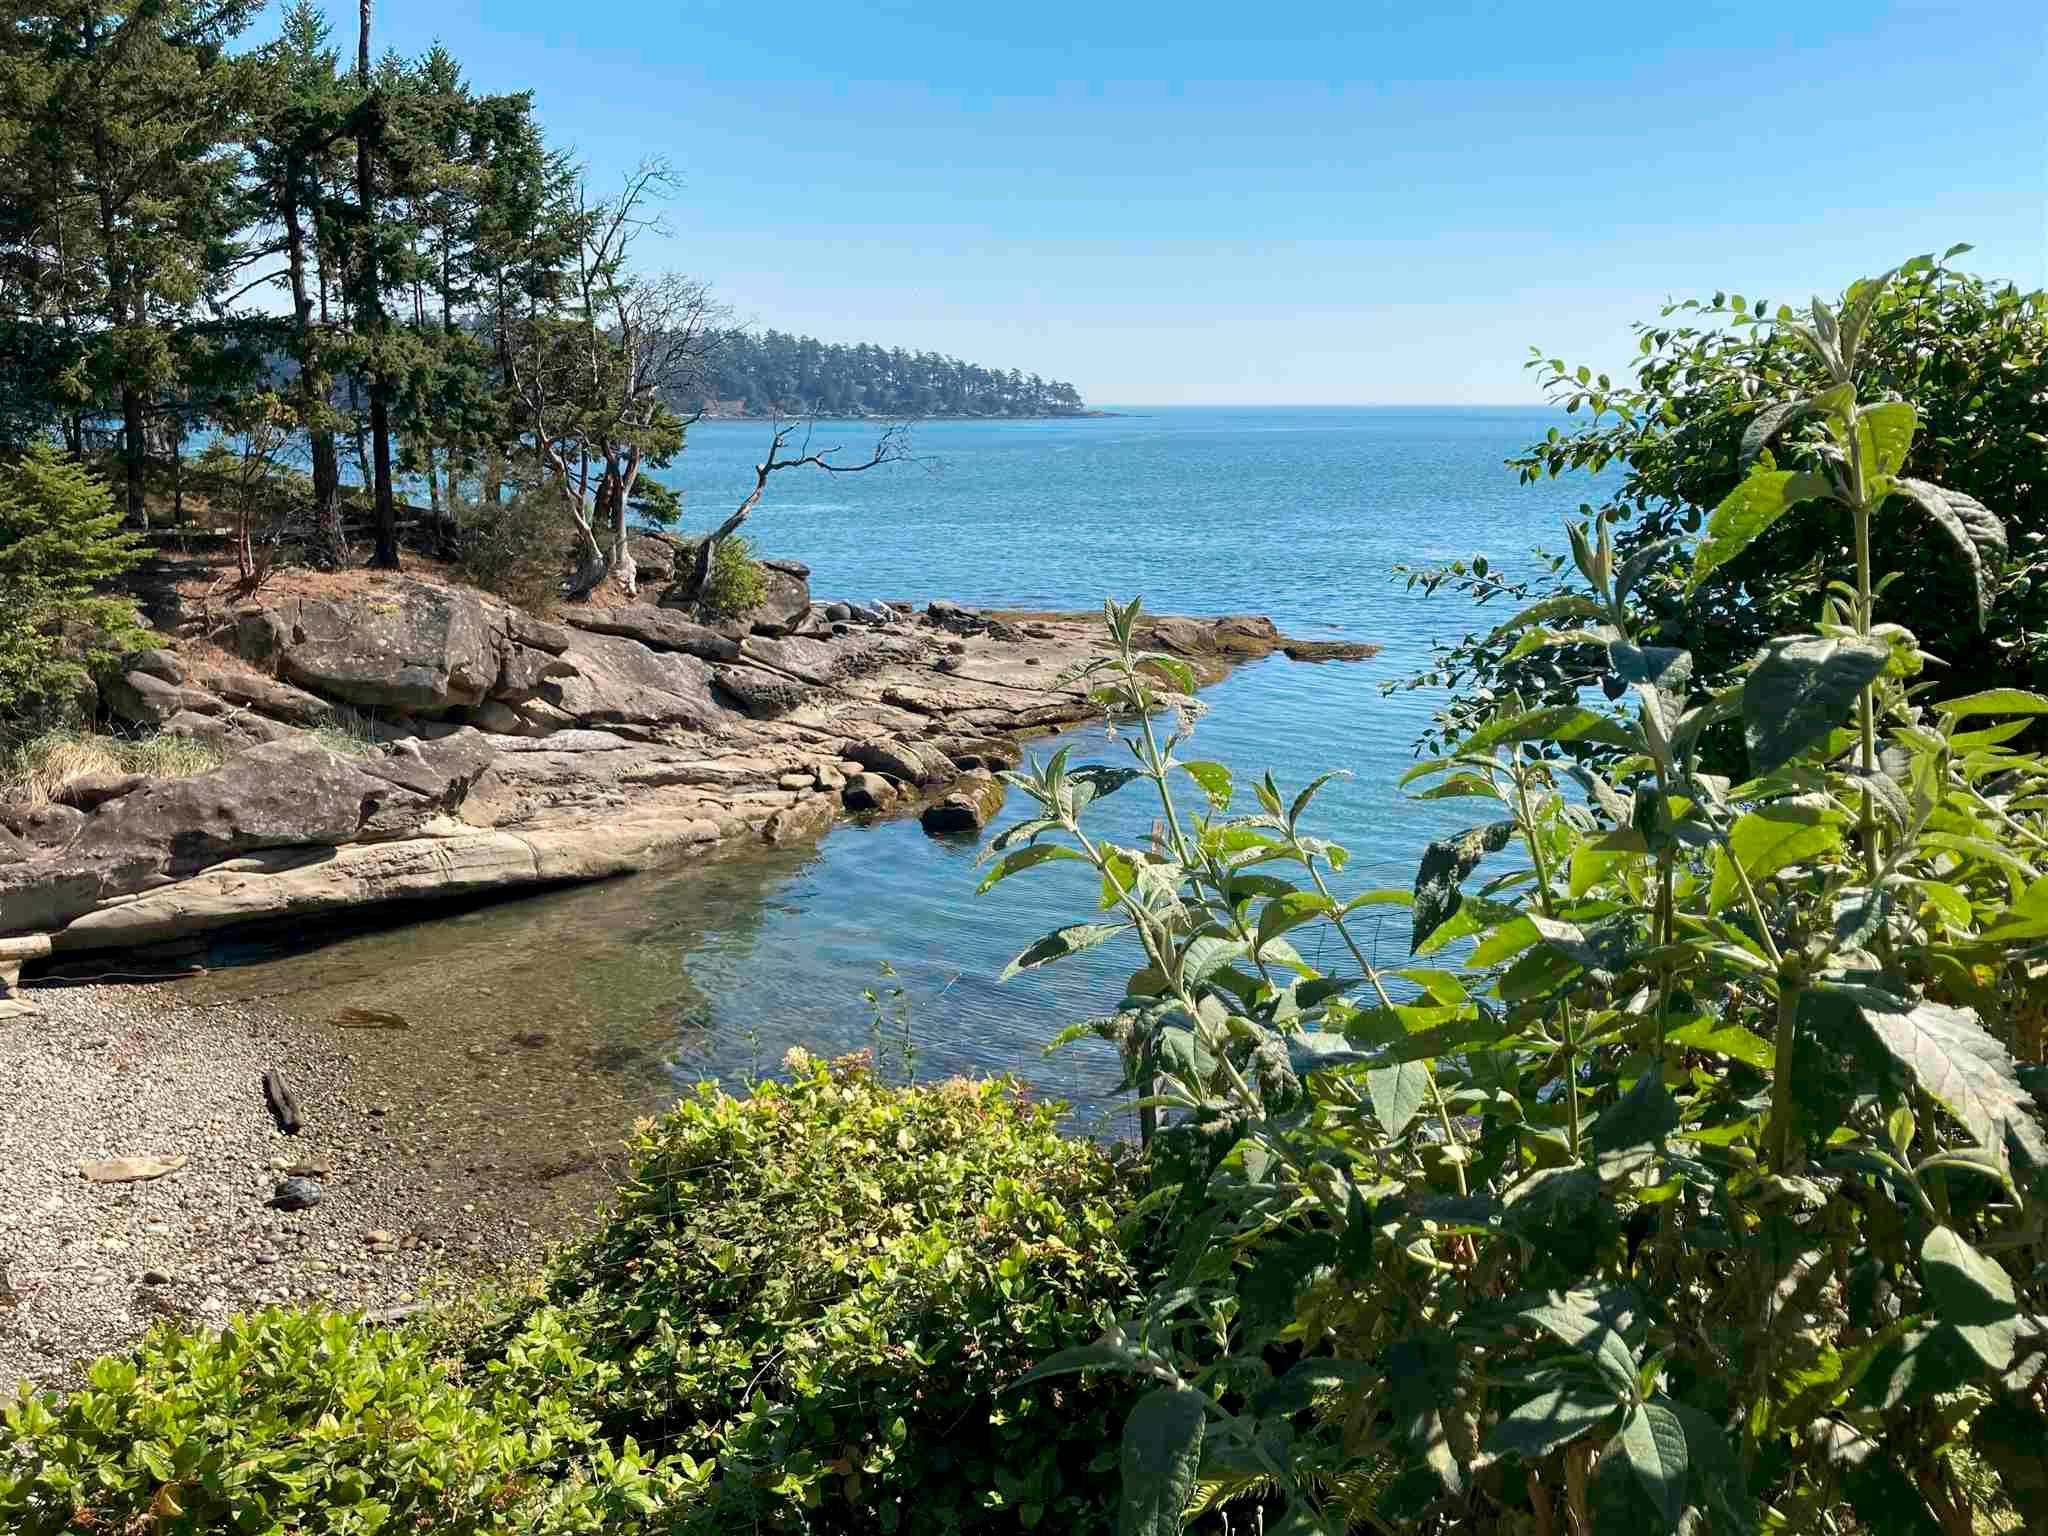 Main Photo: 586 BAKERVIEW DRIVE in : Mayne Island House for sale : MLS®# R2529292